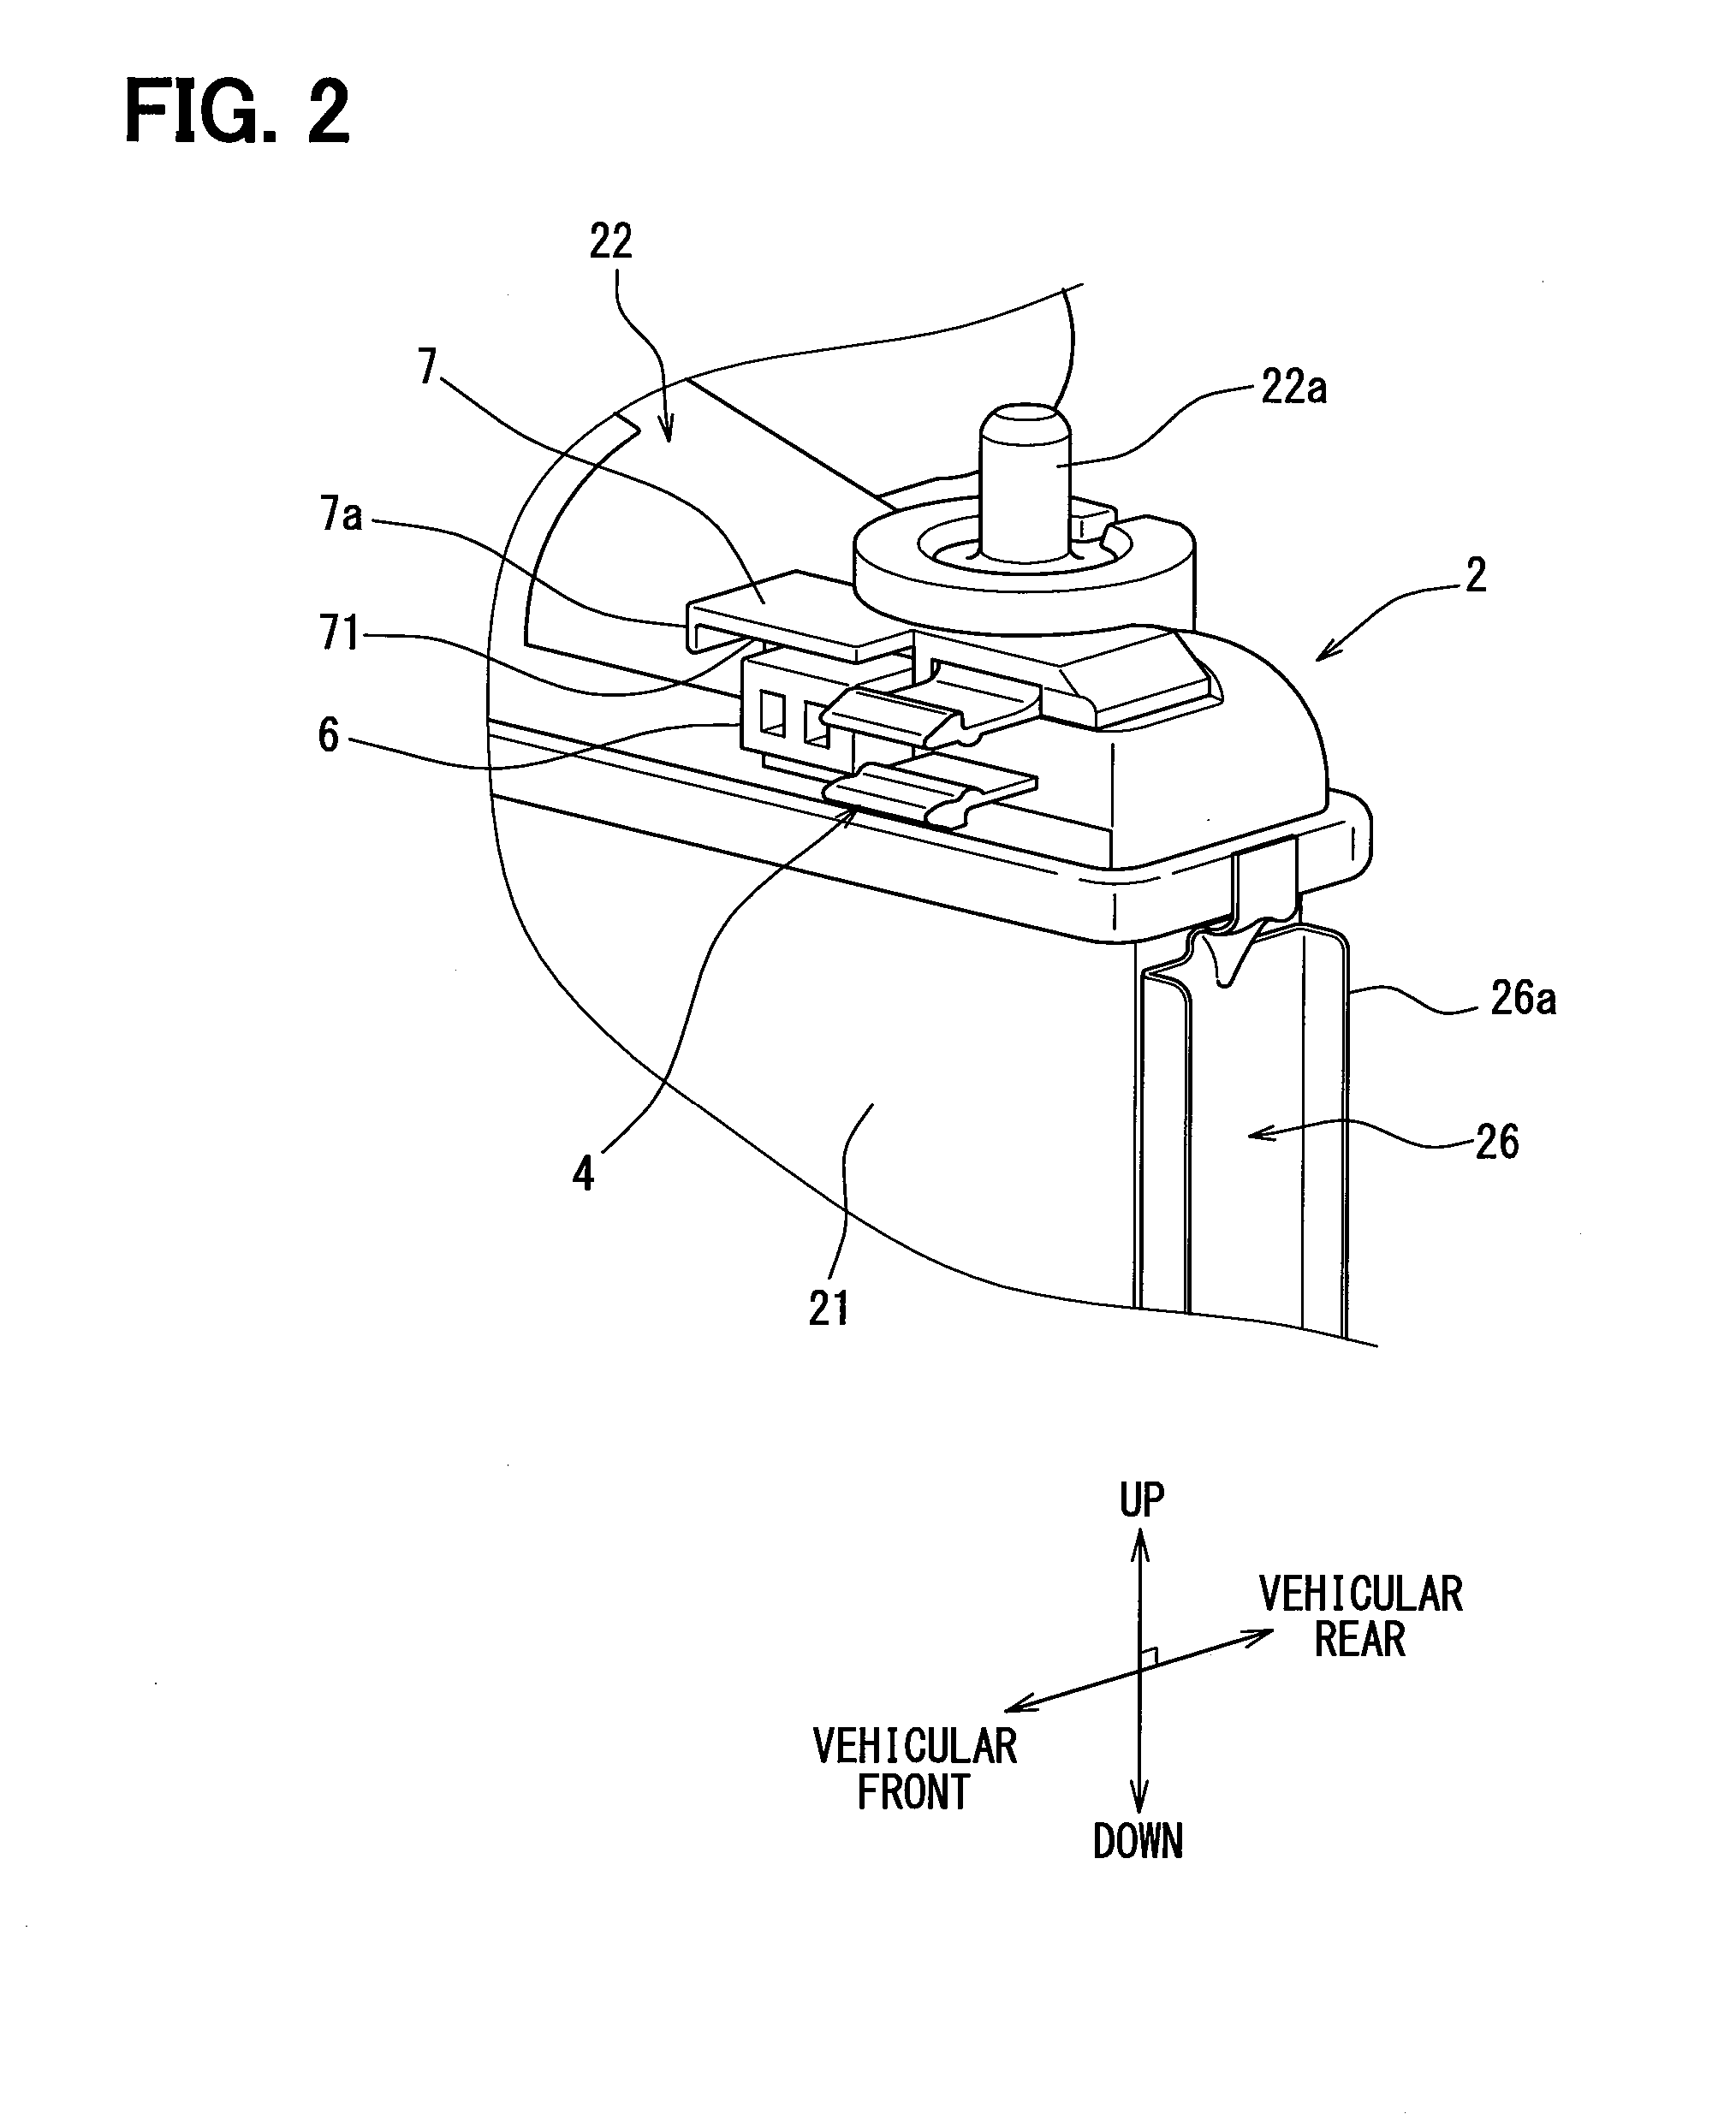 Heat exchanger mounting structure